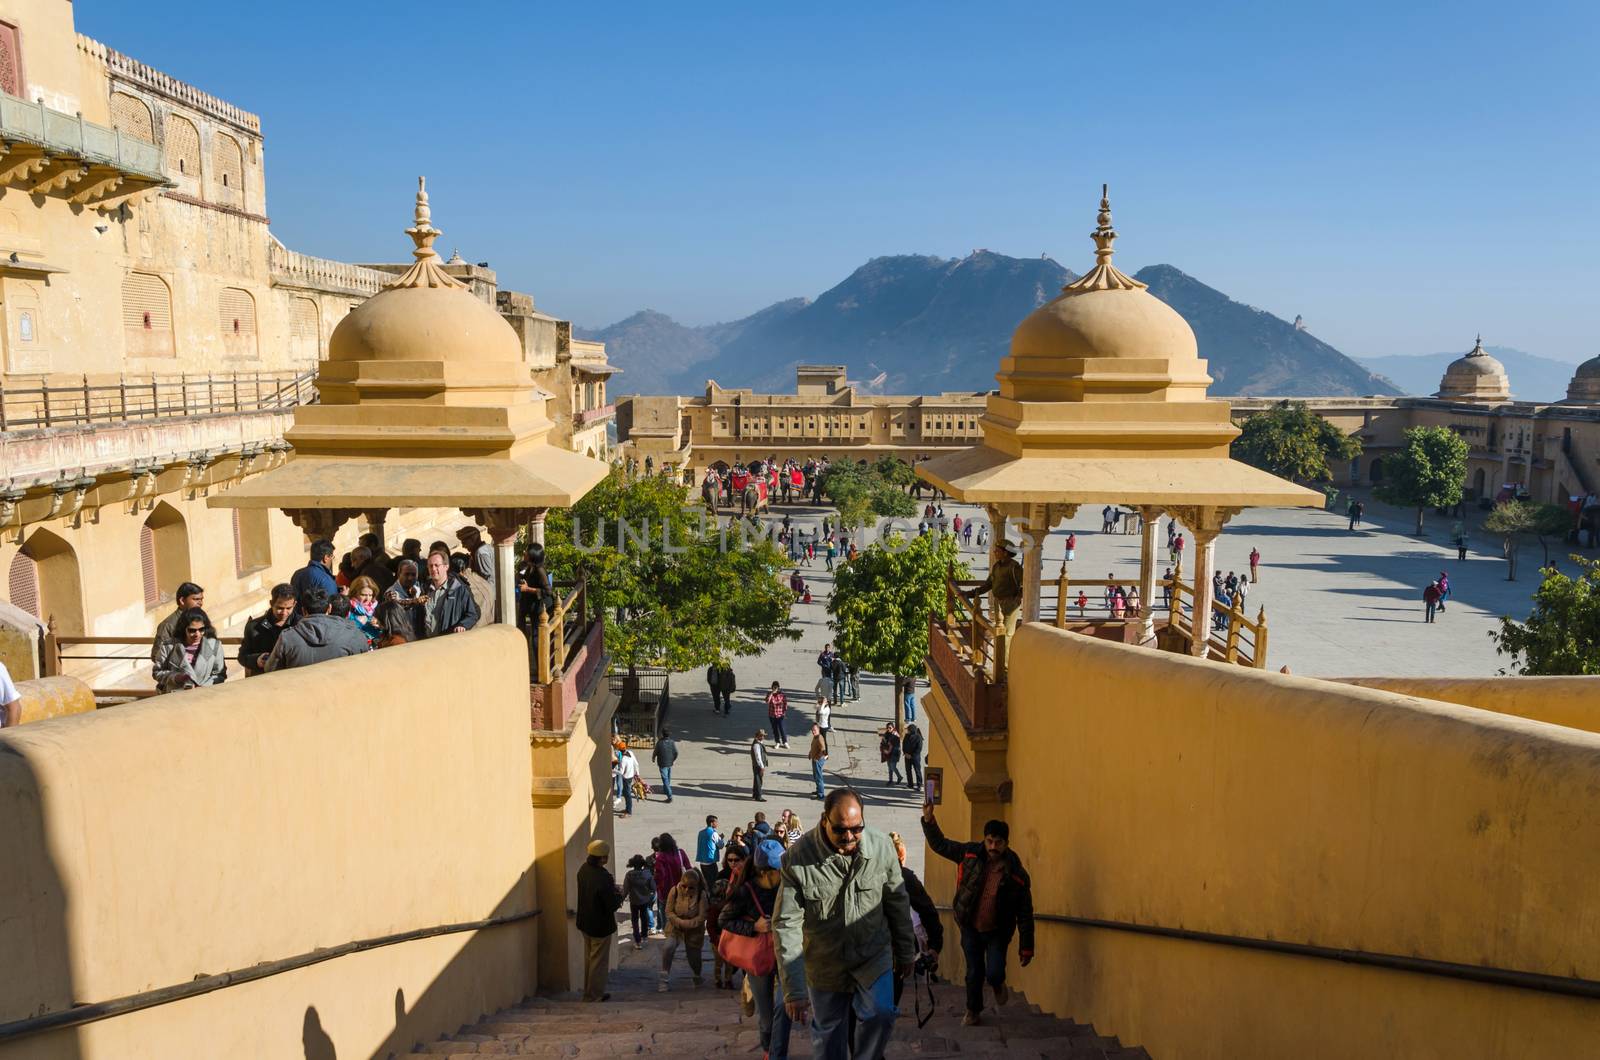 Jaipur, India - December 29, 2014: Tourists visit Amber Fort in Jaipur, Rajasthan, India on December29, 2014. The Fort was built by Raja Man Singh I.